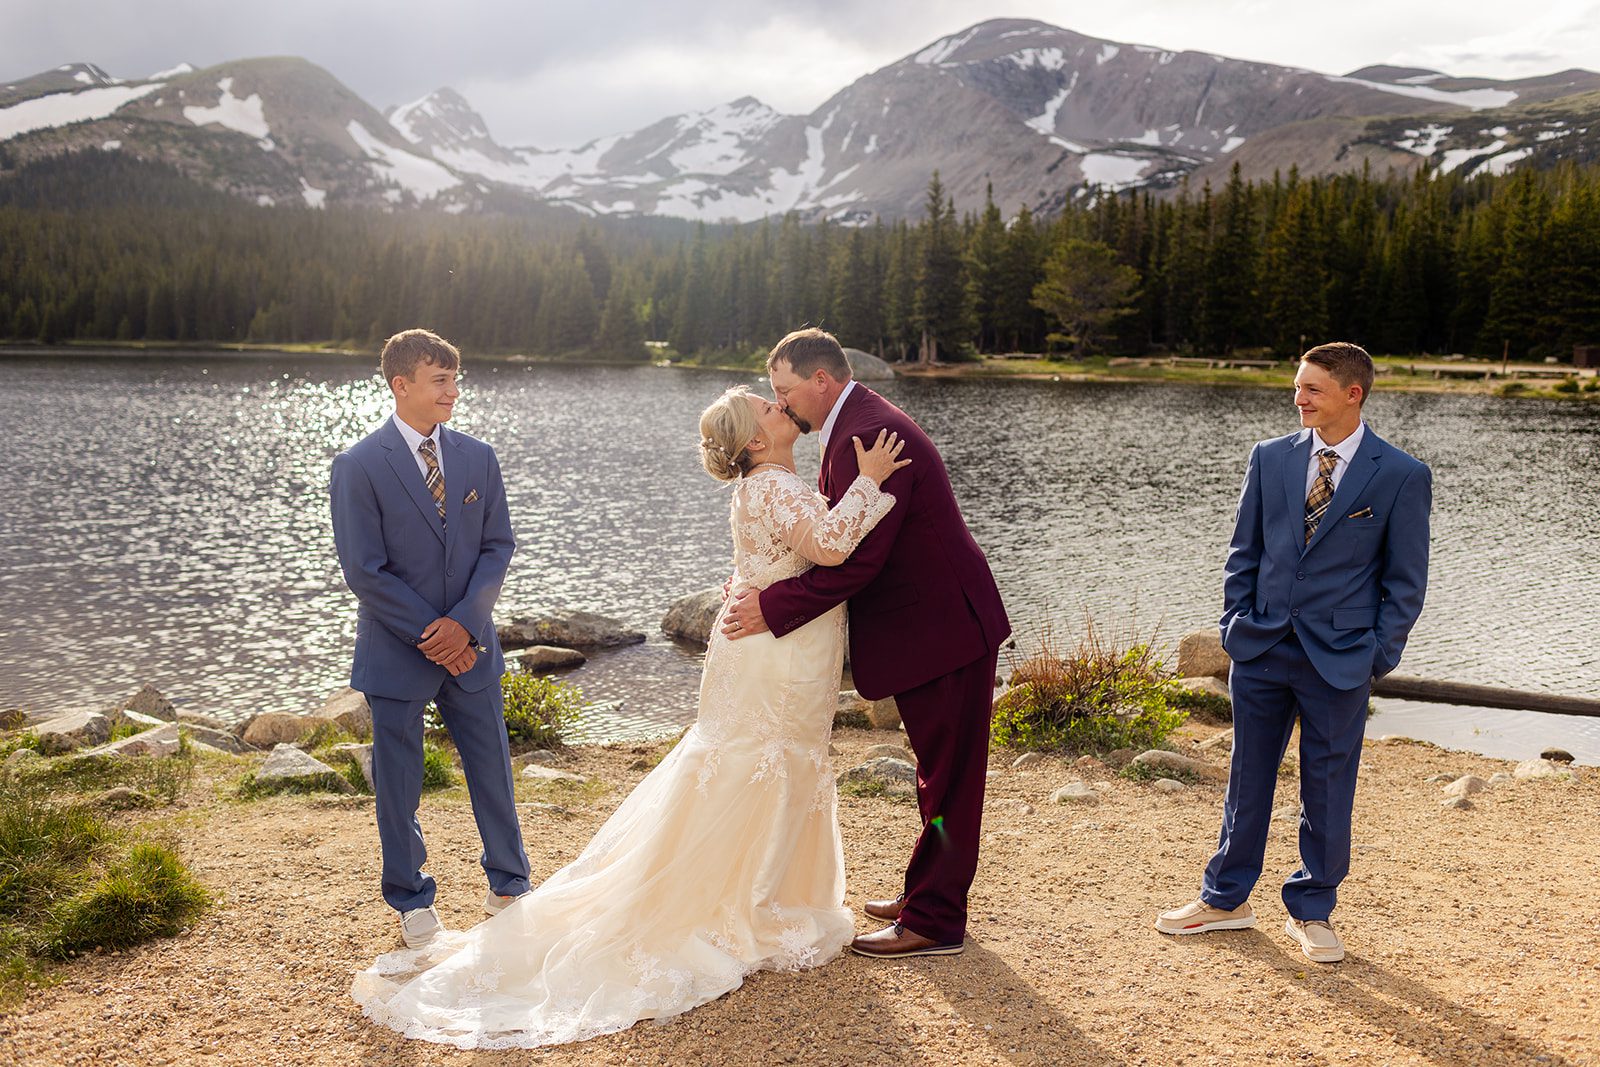 bride and groom are official! their first kiss as husband and wife during their Brainard Lake wedding ceremony